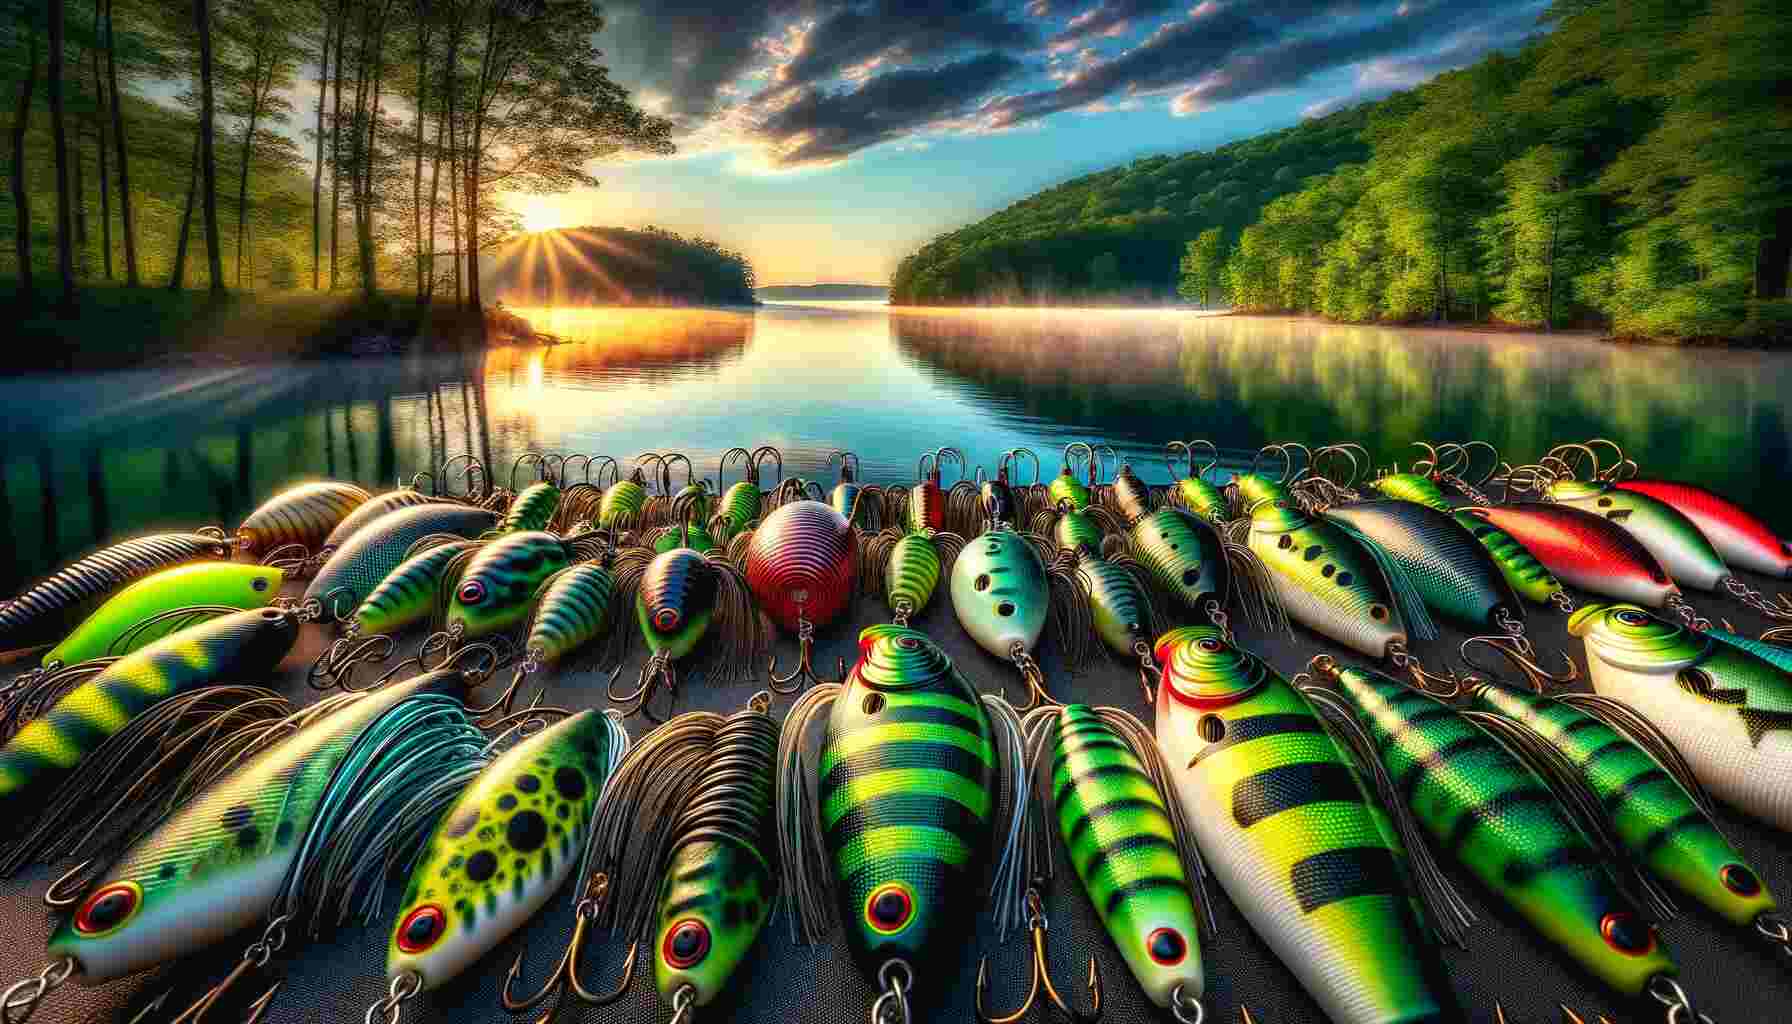 The image features a variety of buzzbaits in different sizes, prominently displayed in the foreground against a serene lake backdrop. Early morning light illuminates the scene, highlighting the water's shimmer and surrounding lush greenery. These buzzbaits are intricately detailed, showcasing their unique features designed specifically for bass fishing. The wide composition captures the expansive fishing environment, conveying the excitement of bass fishing with buzzbaits.